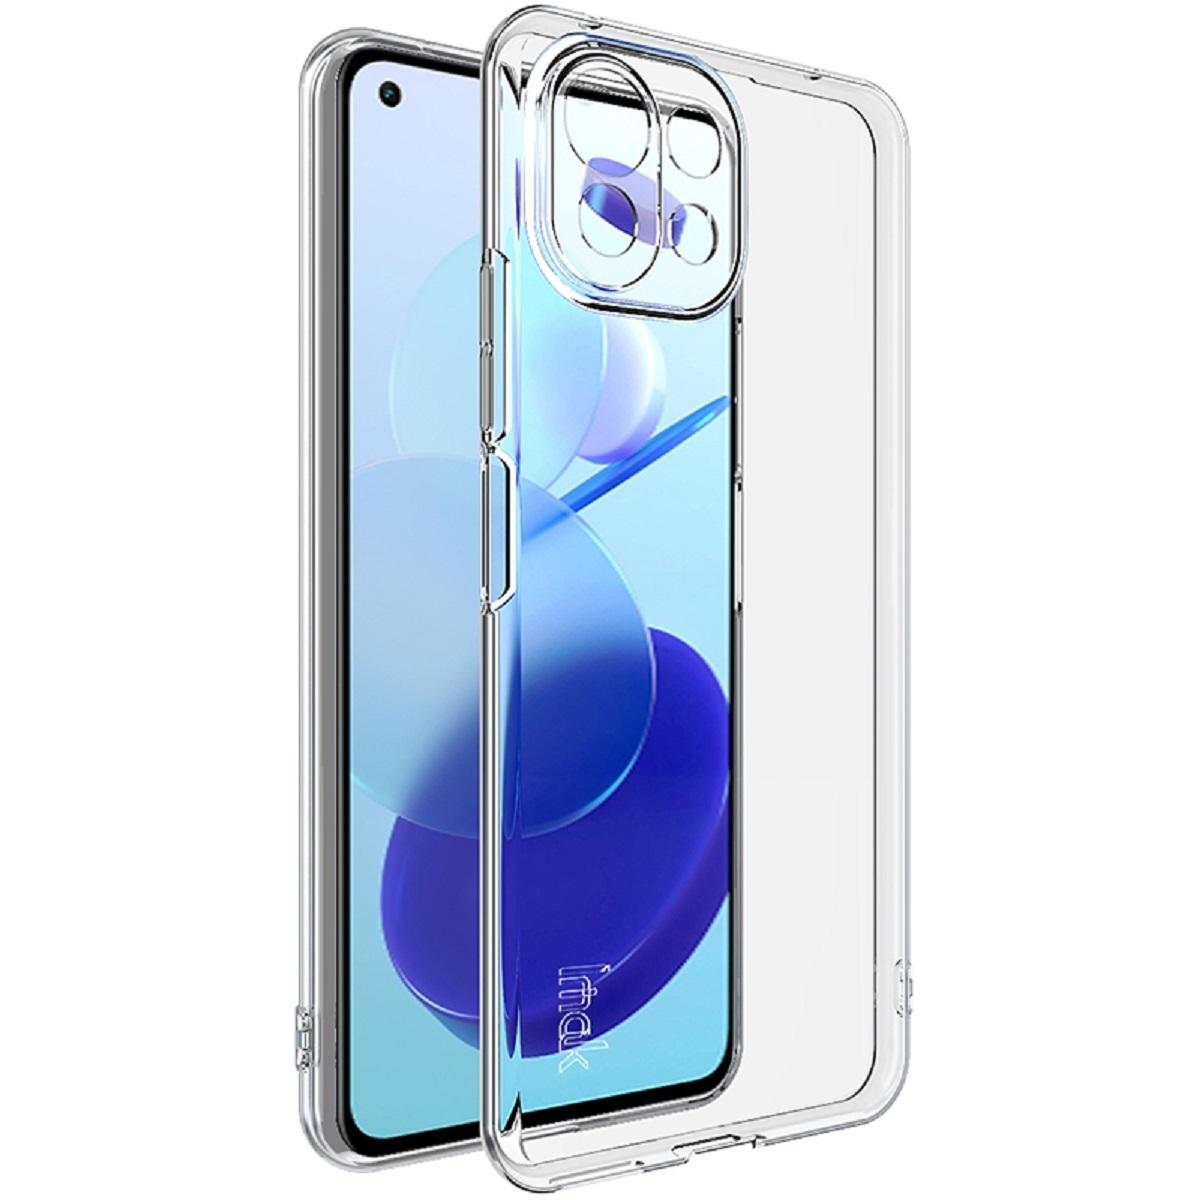 PROTECTORKING Backcover, Hülle, Backcover, Transparent Mi Lite, Xiaomi, 11